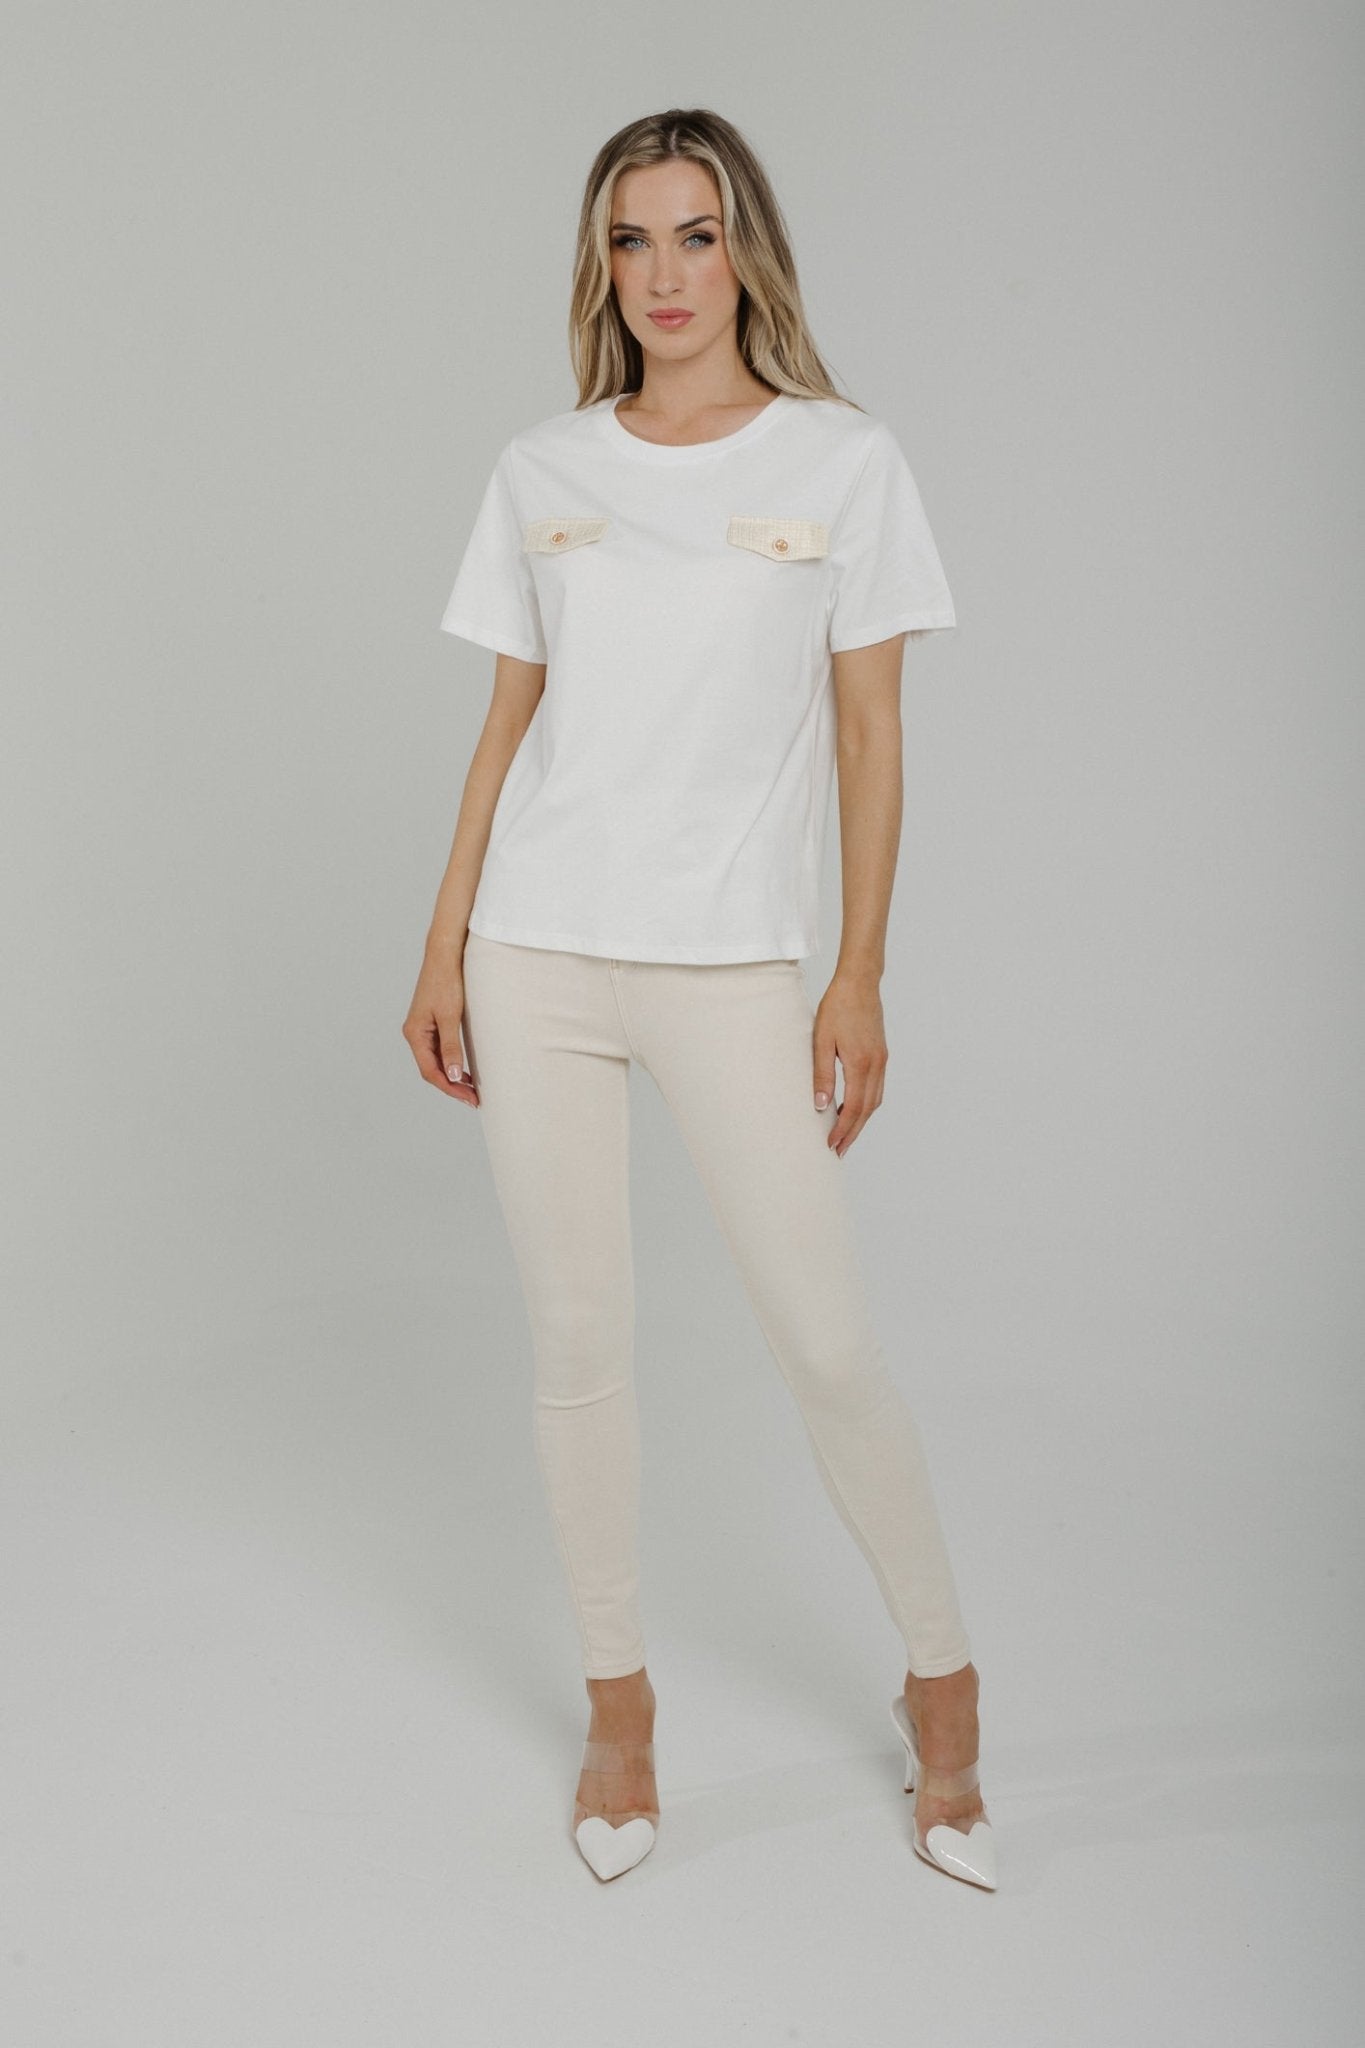 Holly Yellow Pocket Detail T-Shirt In White - The Walk in Wardrobe